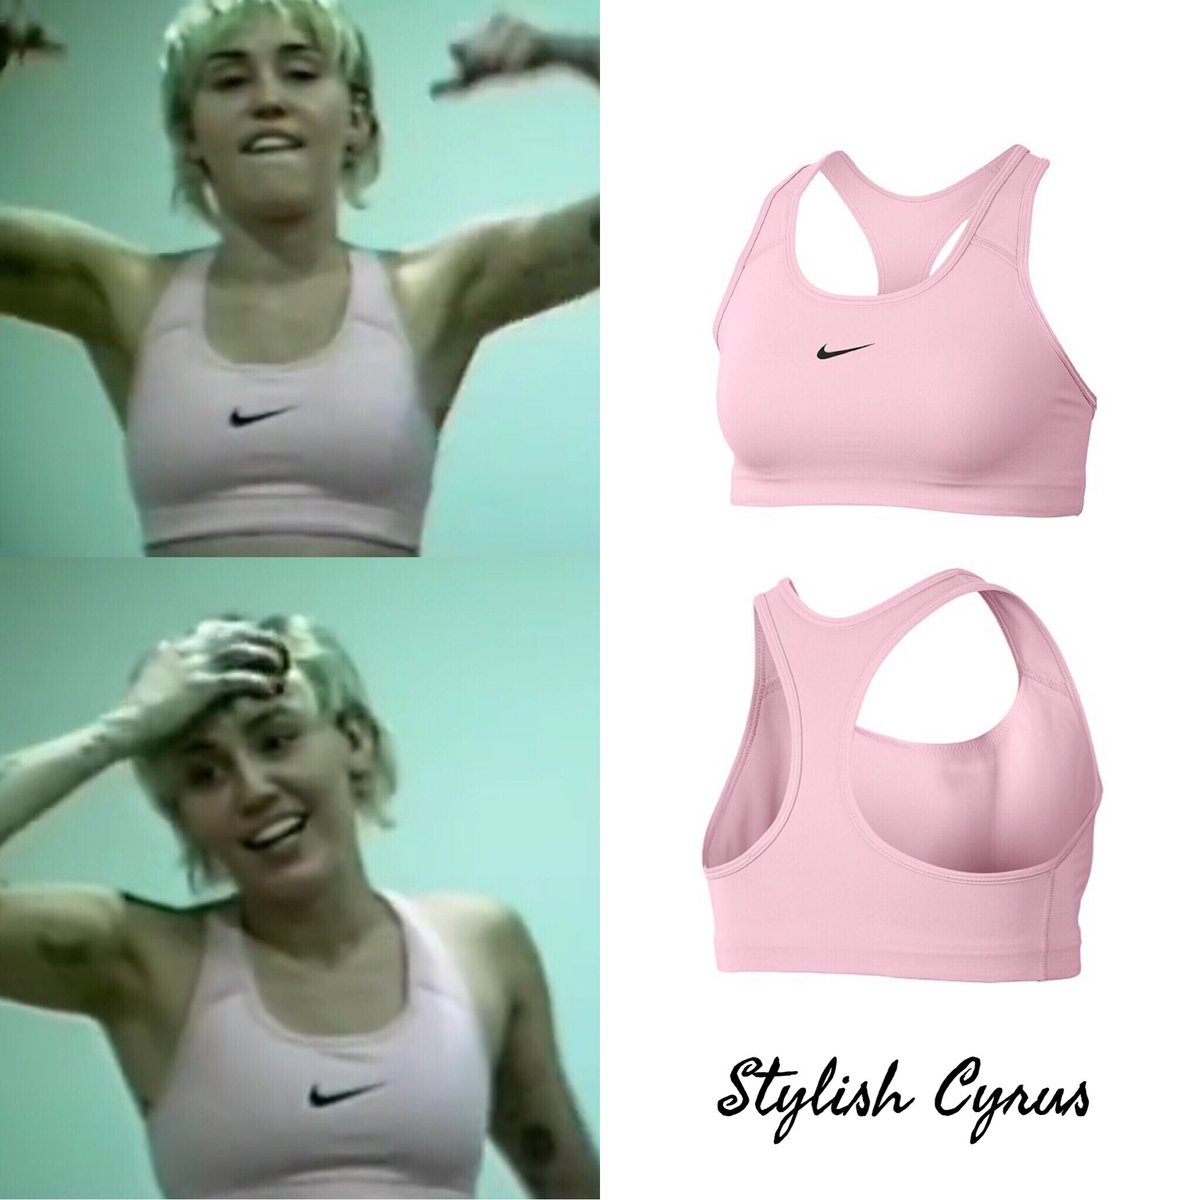 Twitter-এ Miley Cyrus Fashion: ".@mileycyrus wears a light pink swoosh sports bra by @nike ($38) while training for her Super Bowl Tik Tok Tailgate set 💪🏼 Watch the full video